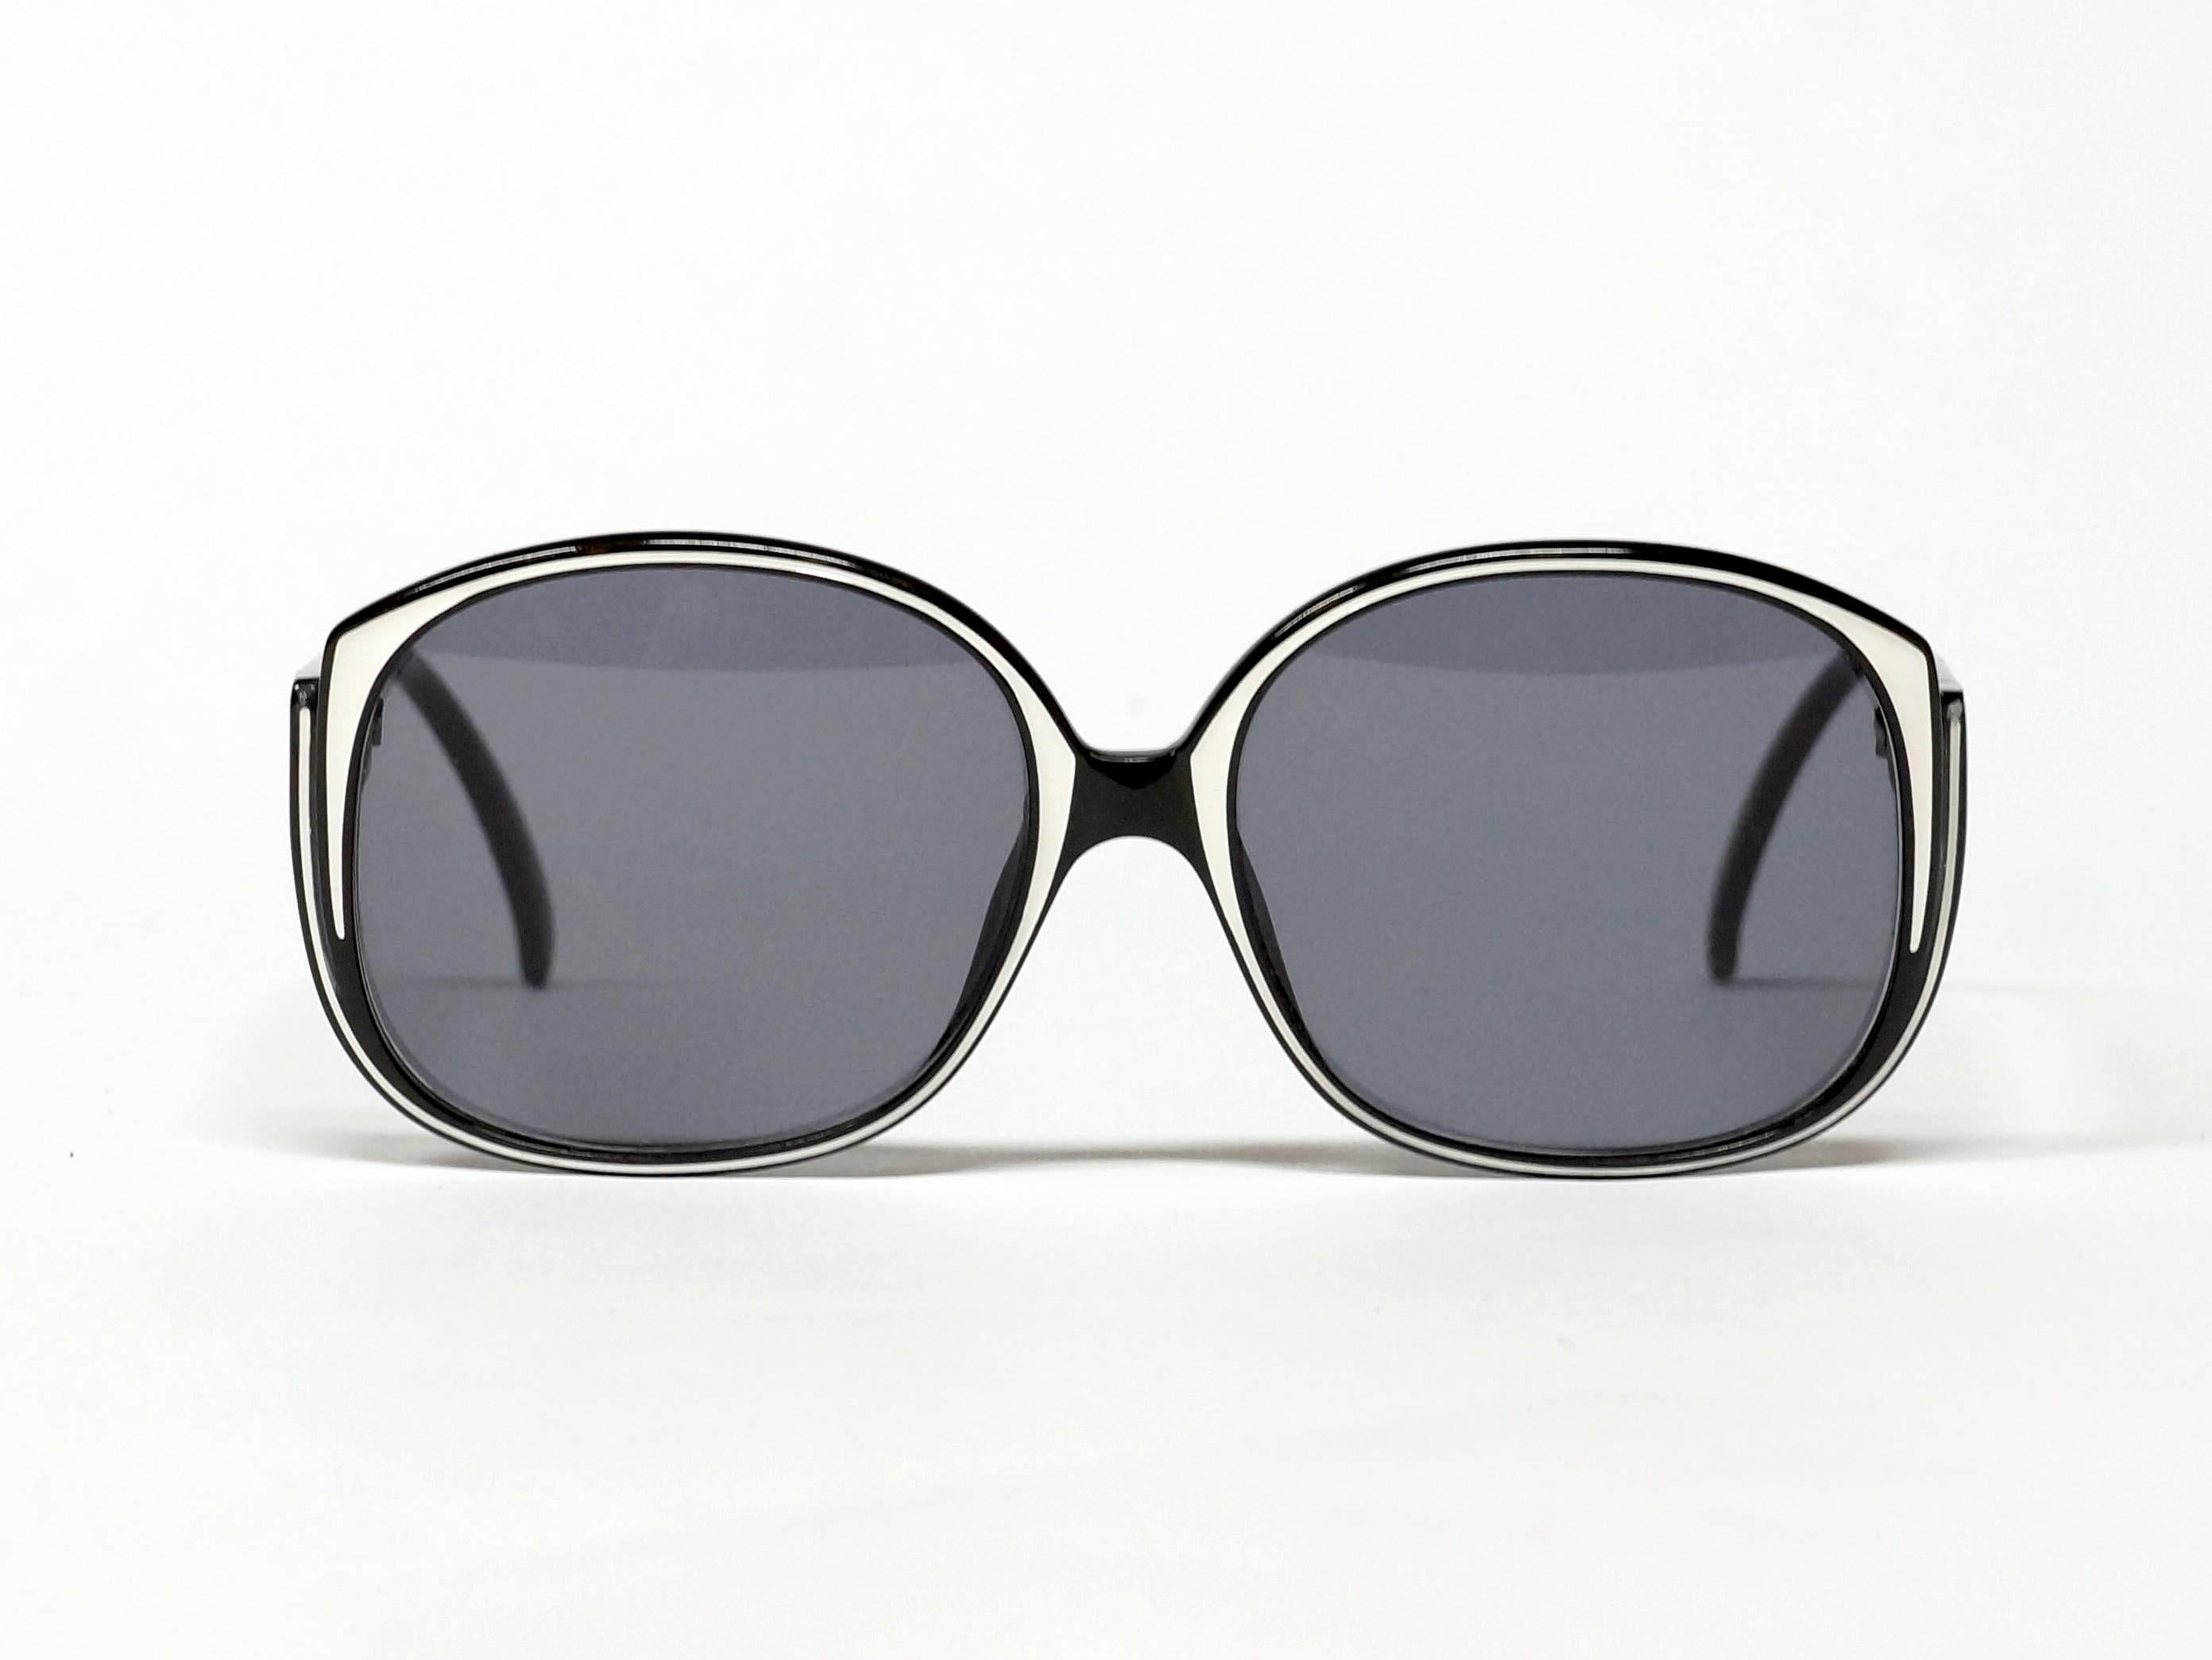 Stylish 1980s vintage sunglasses by Christian Dior in black and white with metal CD logo's on the temples. This German frame in lightweight and long-living Optyl-material is very comfortable to wear.

model: 2107

approximate dimensions: